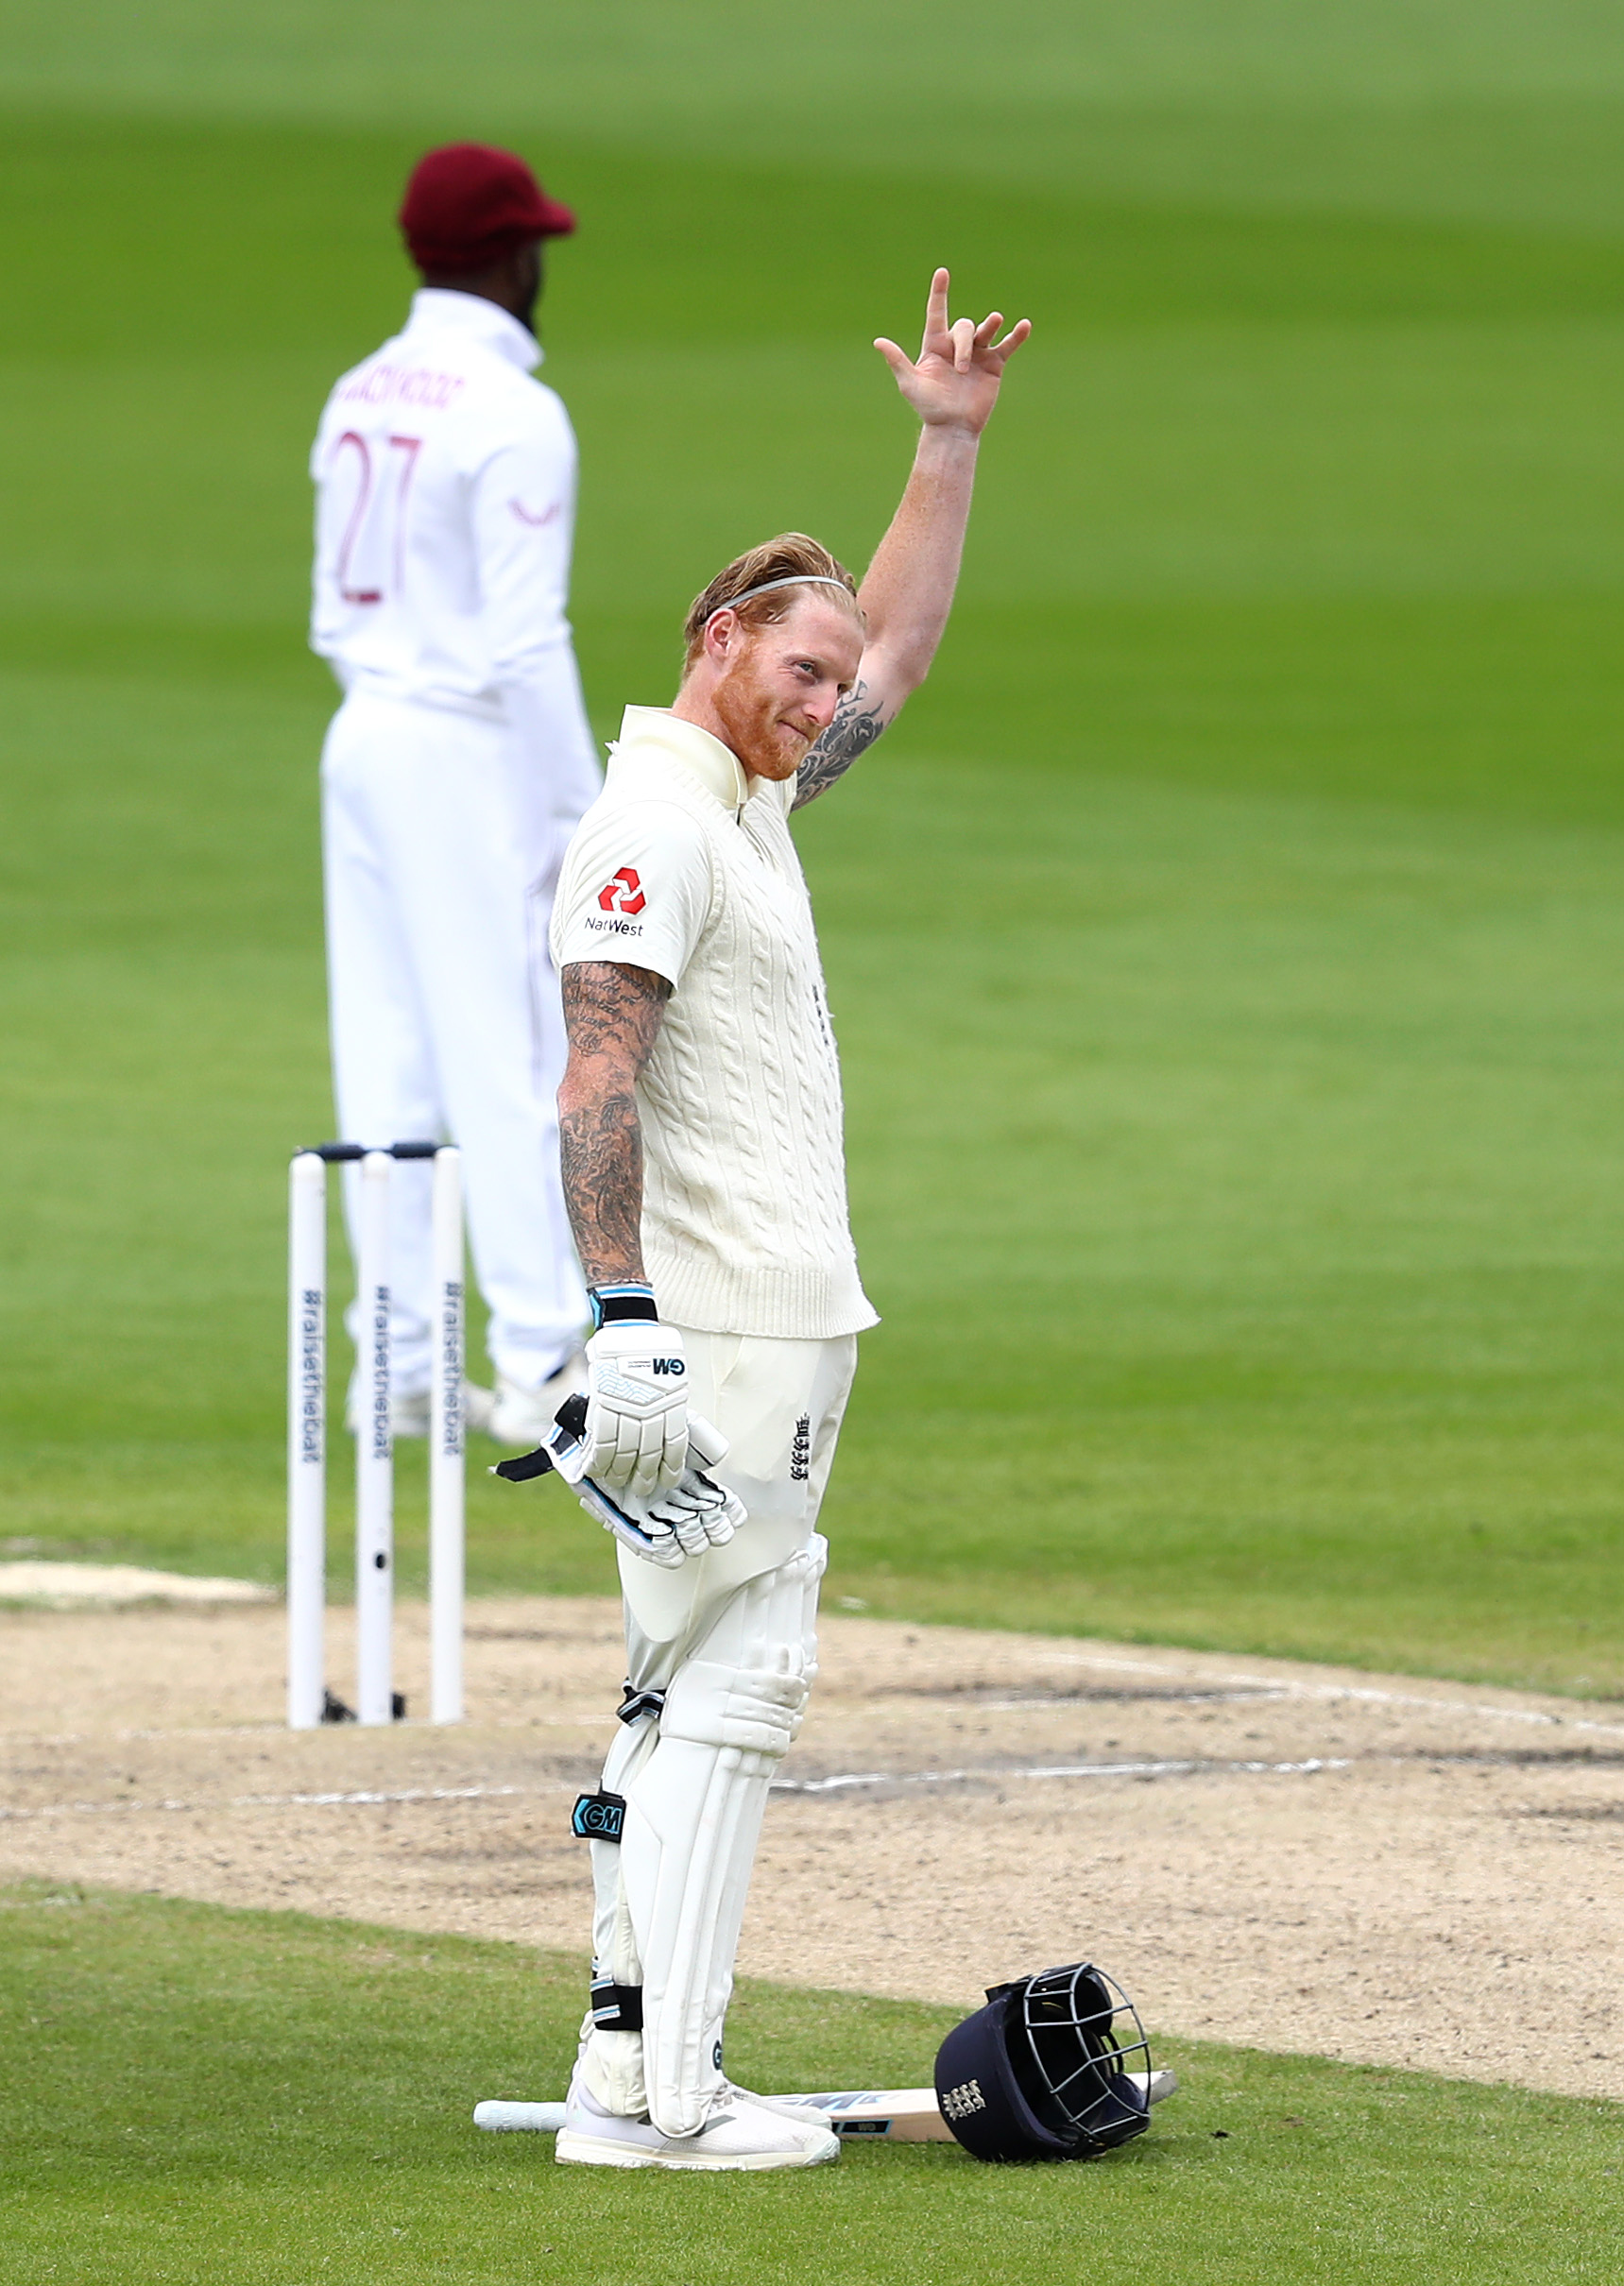 Ben Stokes of England celebrates after reaching his century by making a gesture dedicated to his father in the Test between England and The West Indies (Photo by Michael Steele/Getty Images).